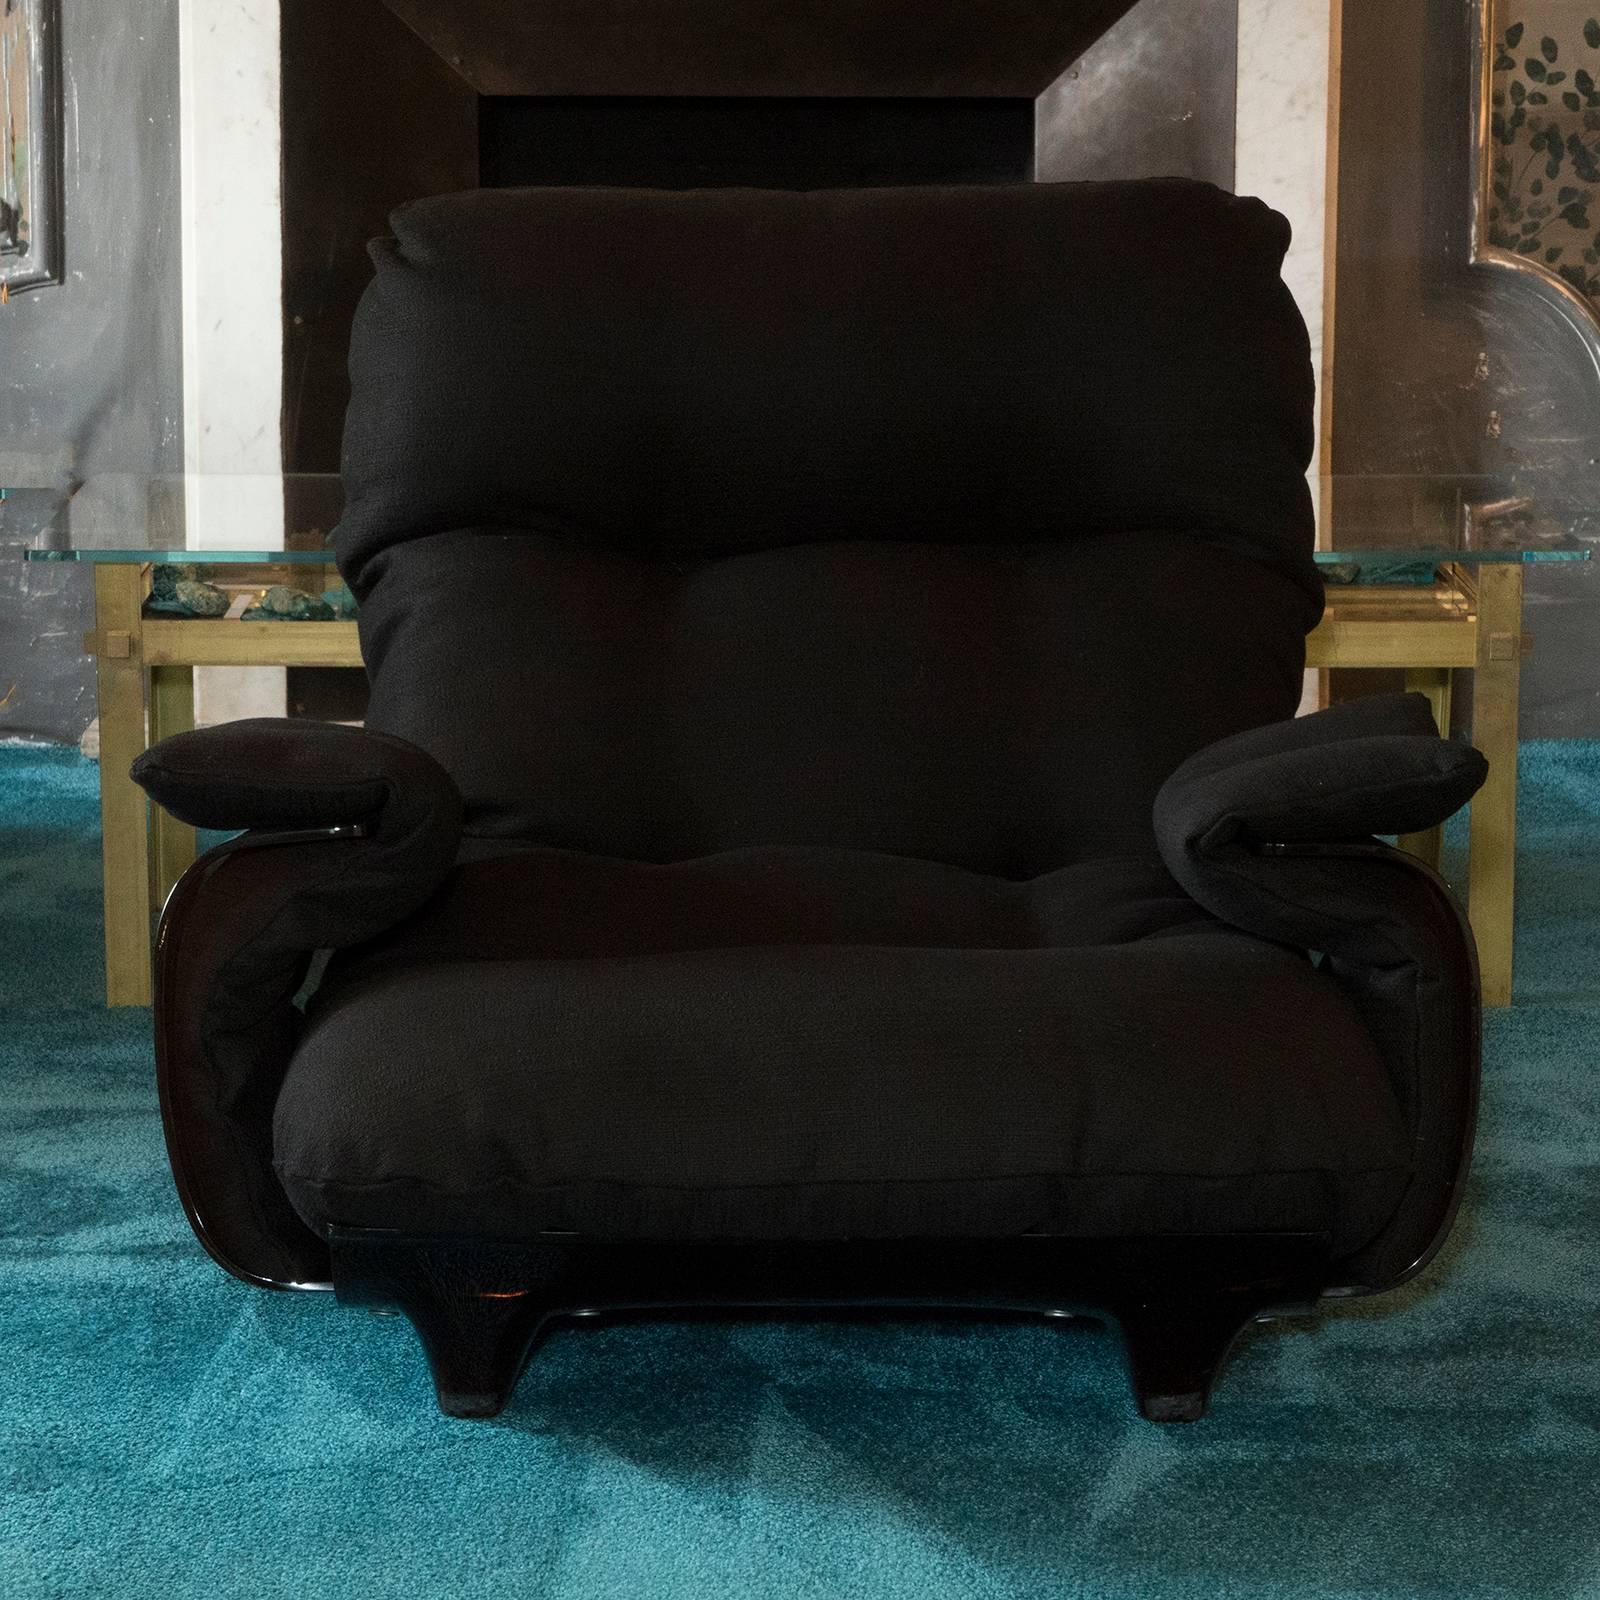 Pair of lounge chairs designed by Michel Ducaroy, Marsala series manufactured by Ligne Roset, amber plexiglass base with vintage patina and newly reupholstered black cotton woven fabric.